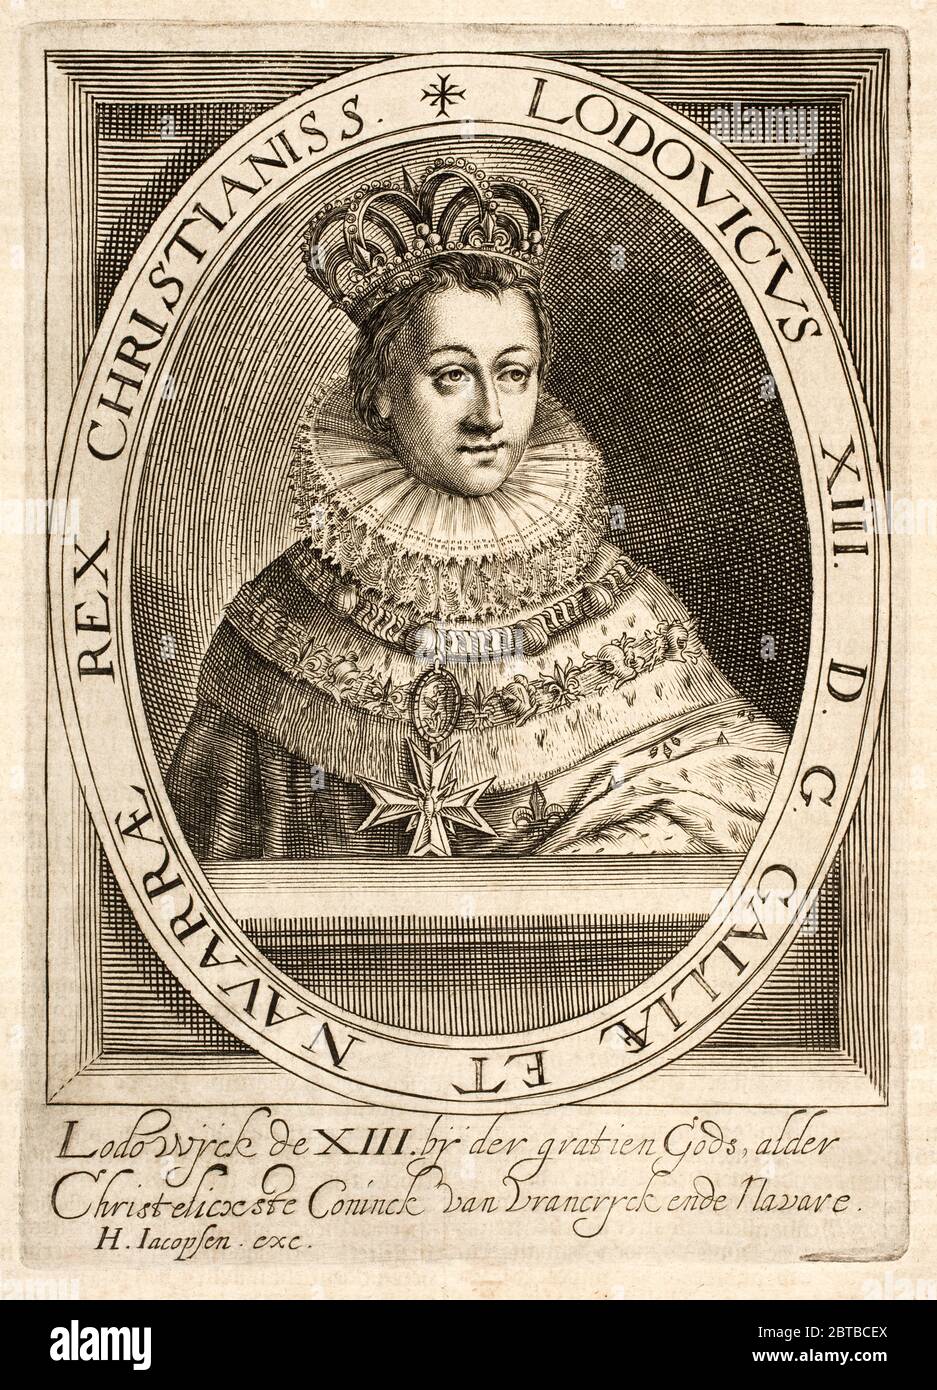 1614, FRANCE: French French King LOUIS XIII ( 1601 - 1643 ) the day of coronation, son of Queen MARIA DE MEDICI ( Marie , 1575 - 1642 ) and King Henri IV de Bourbon . Father of King Louis XIV Le Roi Soleil . Portrait by Emanuel van Meteren ( 1535 - 1612 ) and Simeon Ruytinck , engraved by H. Jacopsen , Holland . - de' Medici - Médicis - NOBILITY - NOBILI francesi - Nobiltà francese - FRANCIA - illustrazione - illustration - engraving - incisione - LUIGI XIII Re di Francia - collar - colletto  - gorgiera - pizzo - lace - pearls  - perle - perla - crown - corona - lusso - luxury - inconorazione Stock Photo